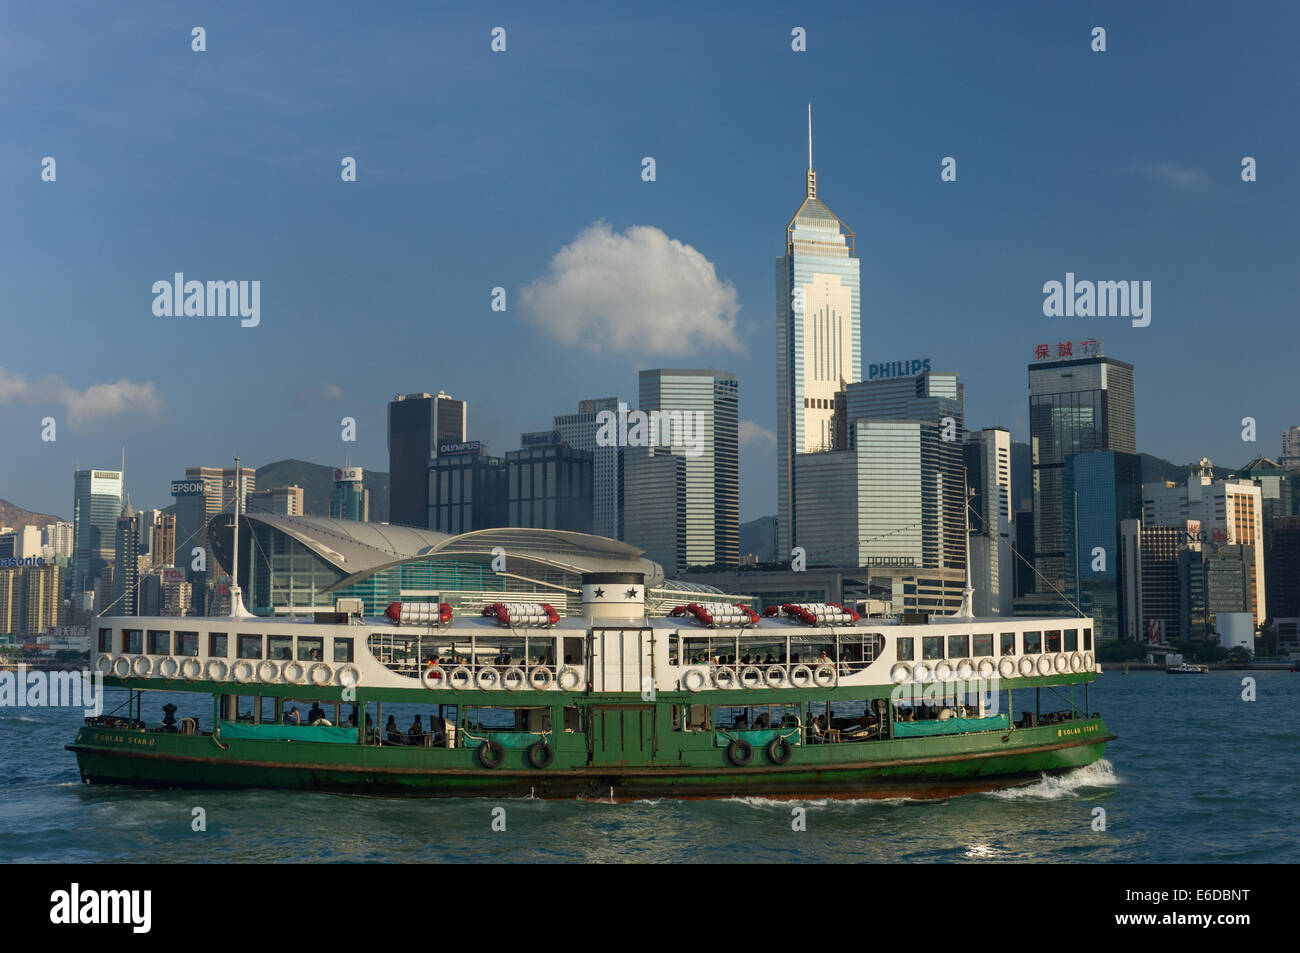 Star Ferry passing the Hong Kong Convention and Exhibition Centre and the tower blocks of the Wan Chai district of Hong Kong Island, Hong Kong, China Stock Photo